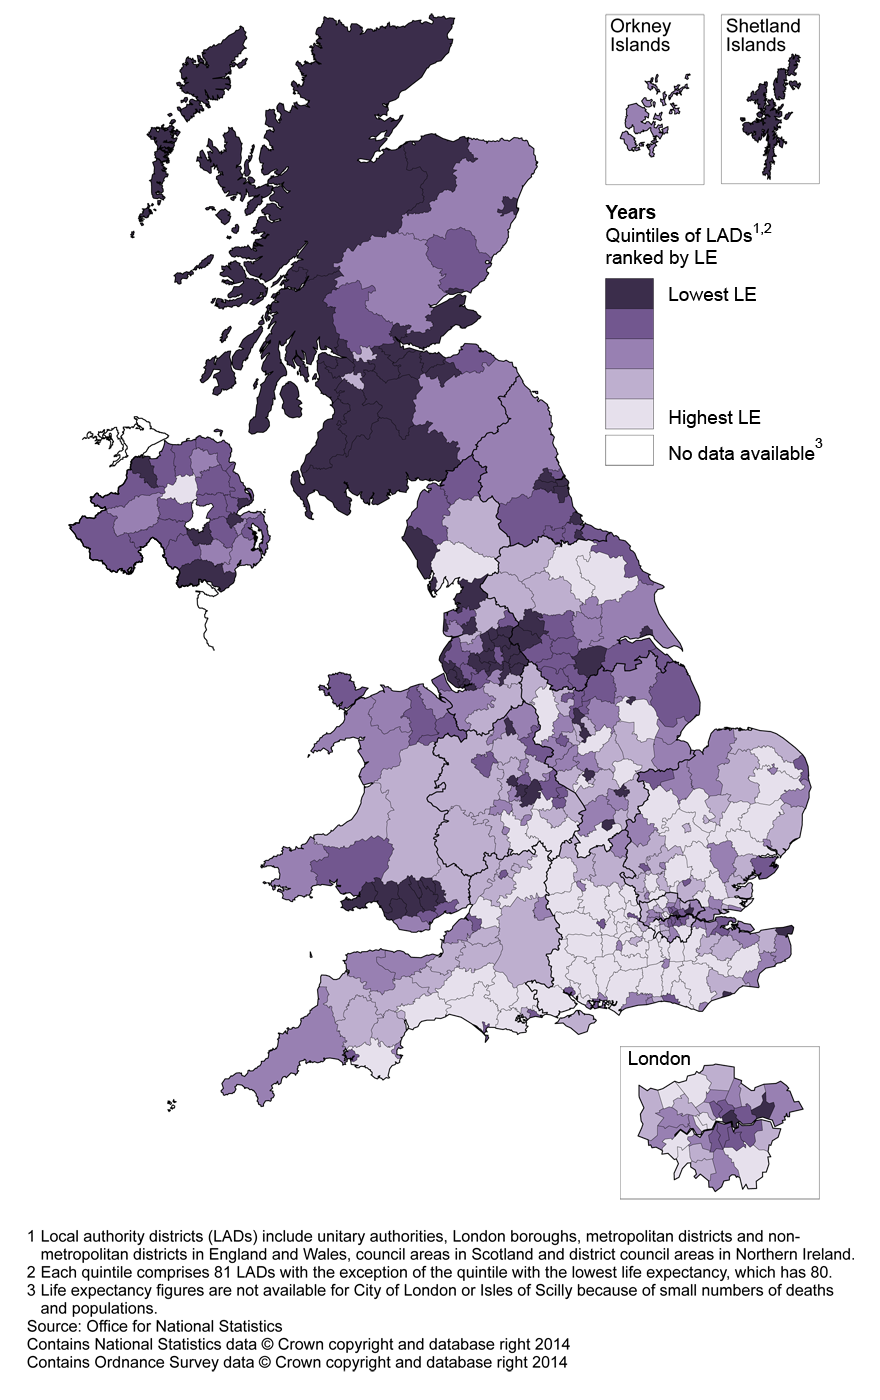 Map 1: Life expectancy (LE) for males at birth by local authority district, United Kingdom, 2010–12